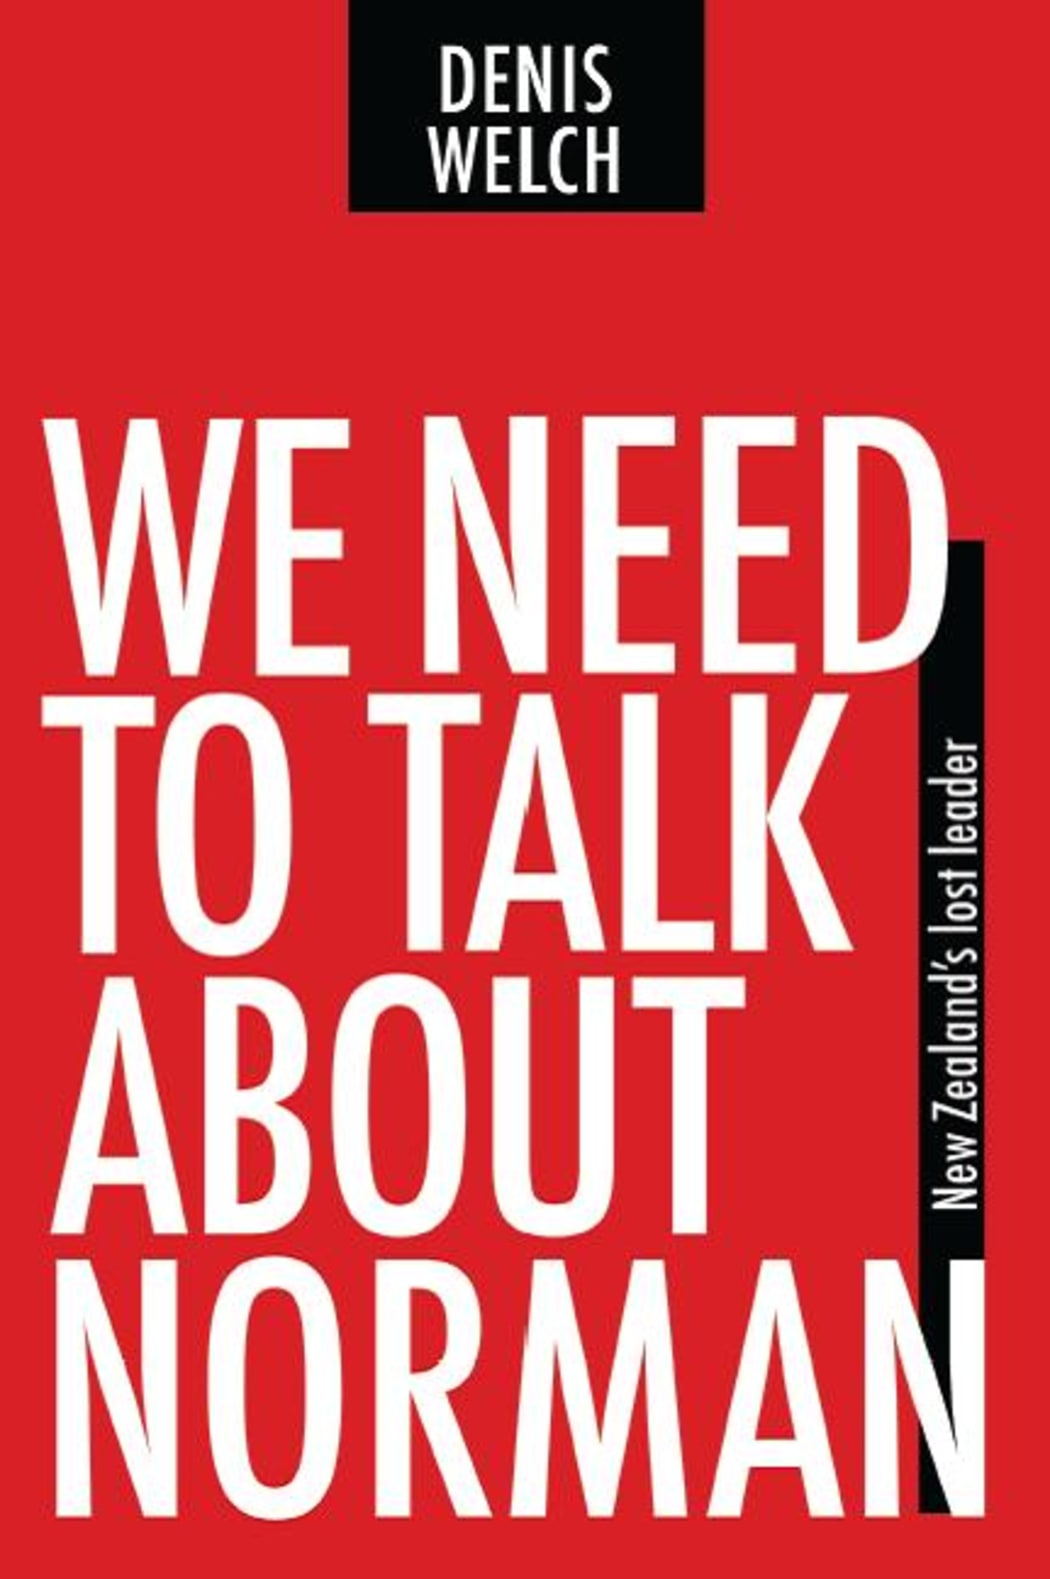 We Need to Talk about Norman book cover